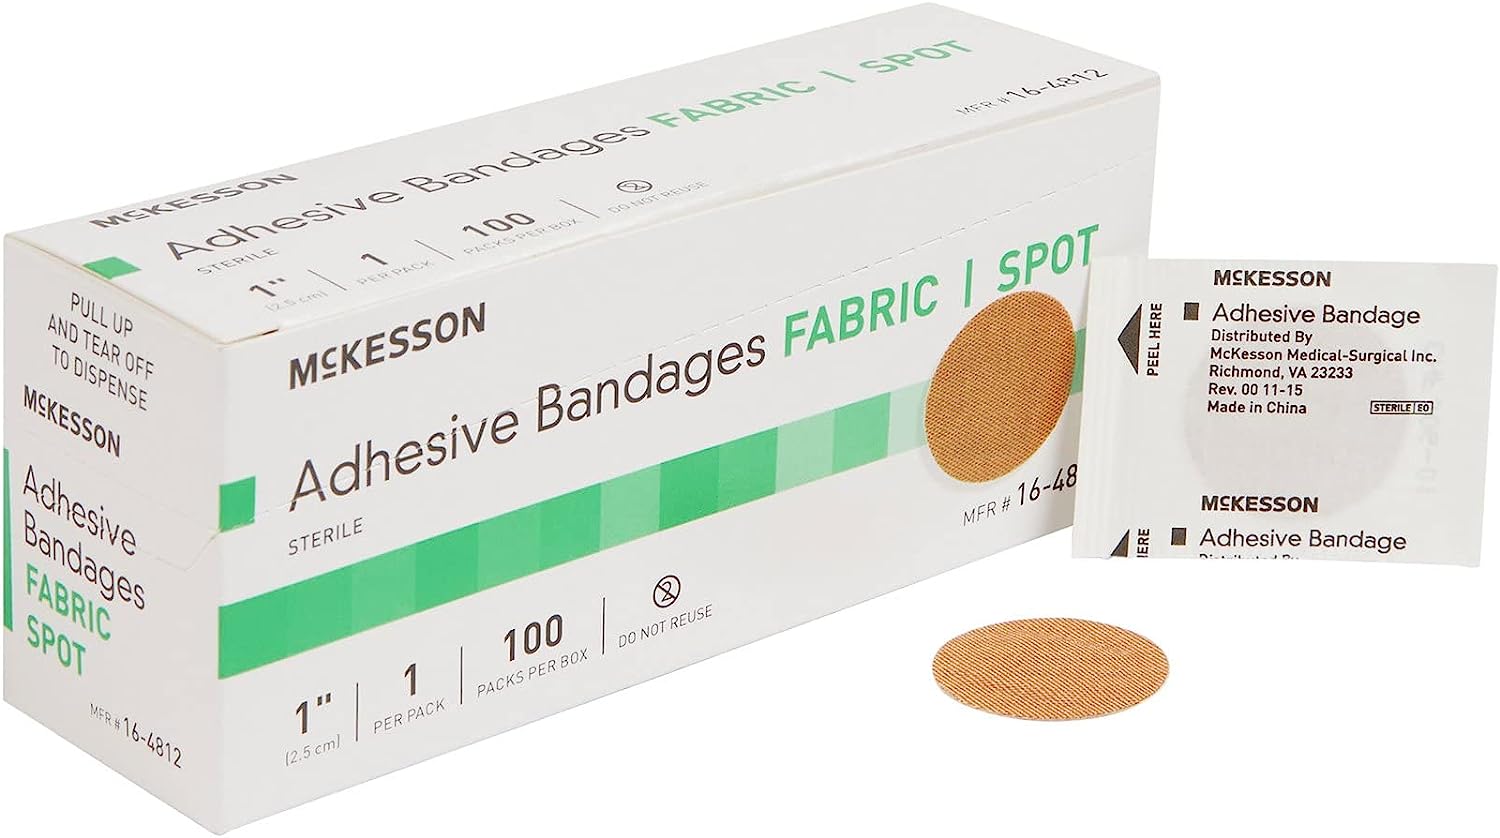 McKesson Adhesive Bandages, Sterile, Fabric Spot, 1 in, 100 Count, 4 Packs, 400 Total